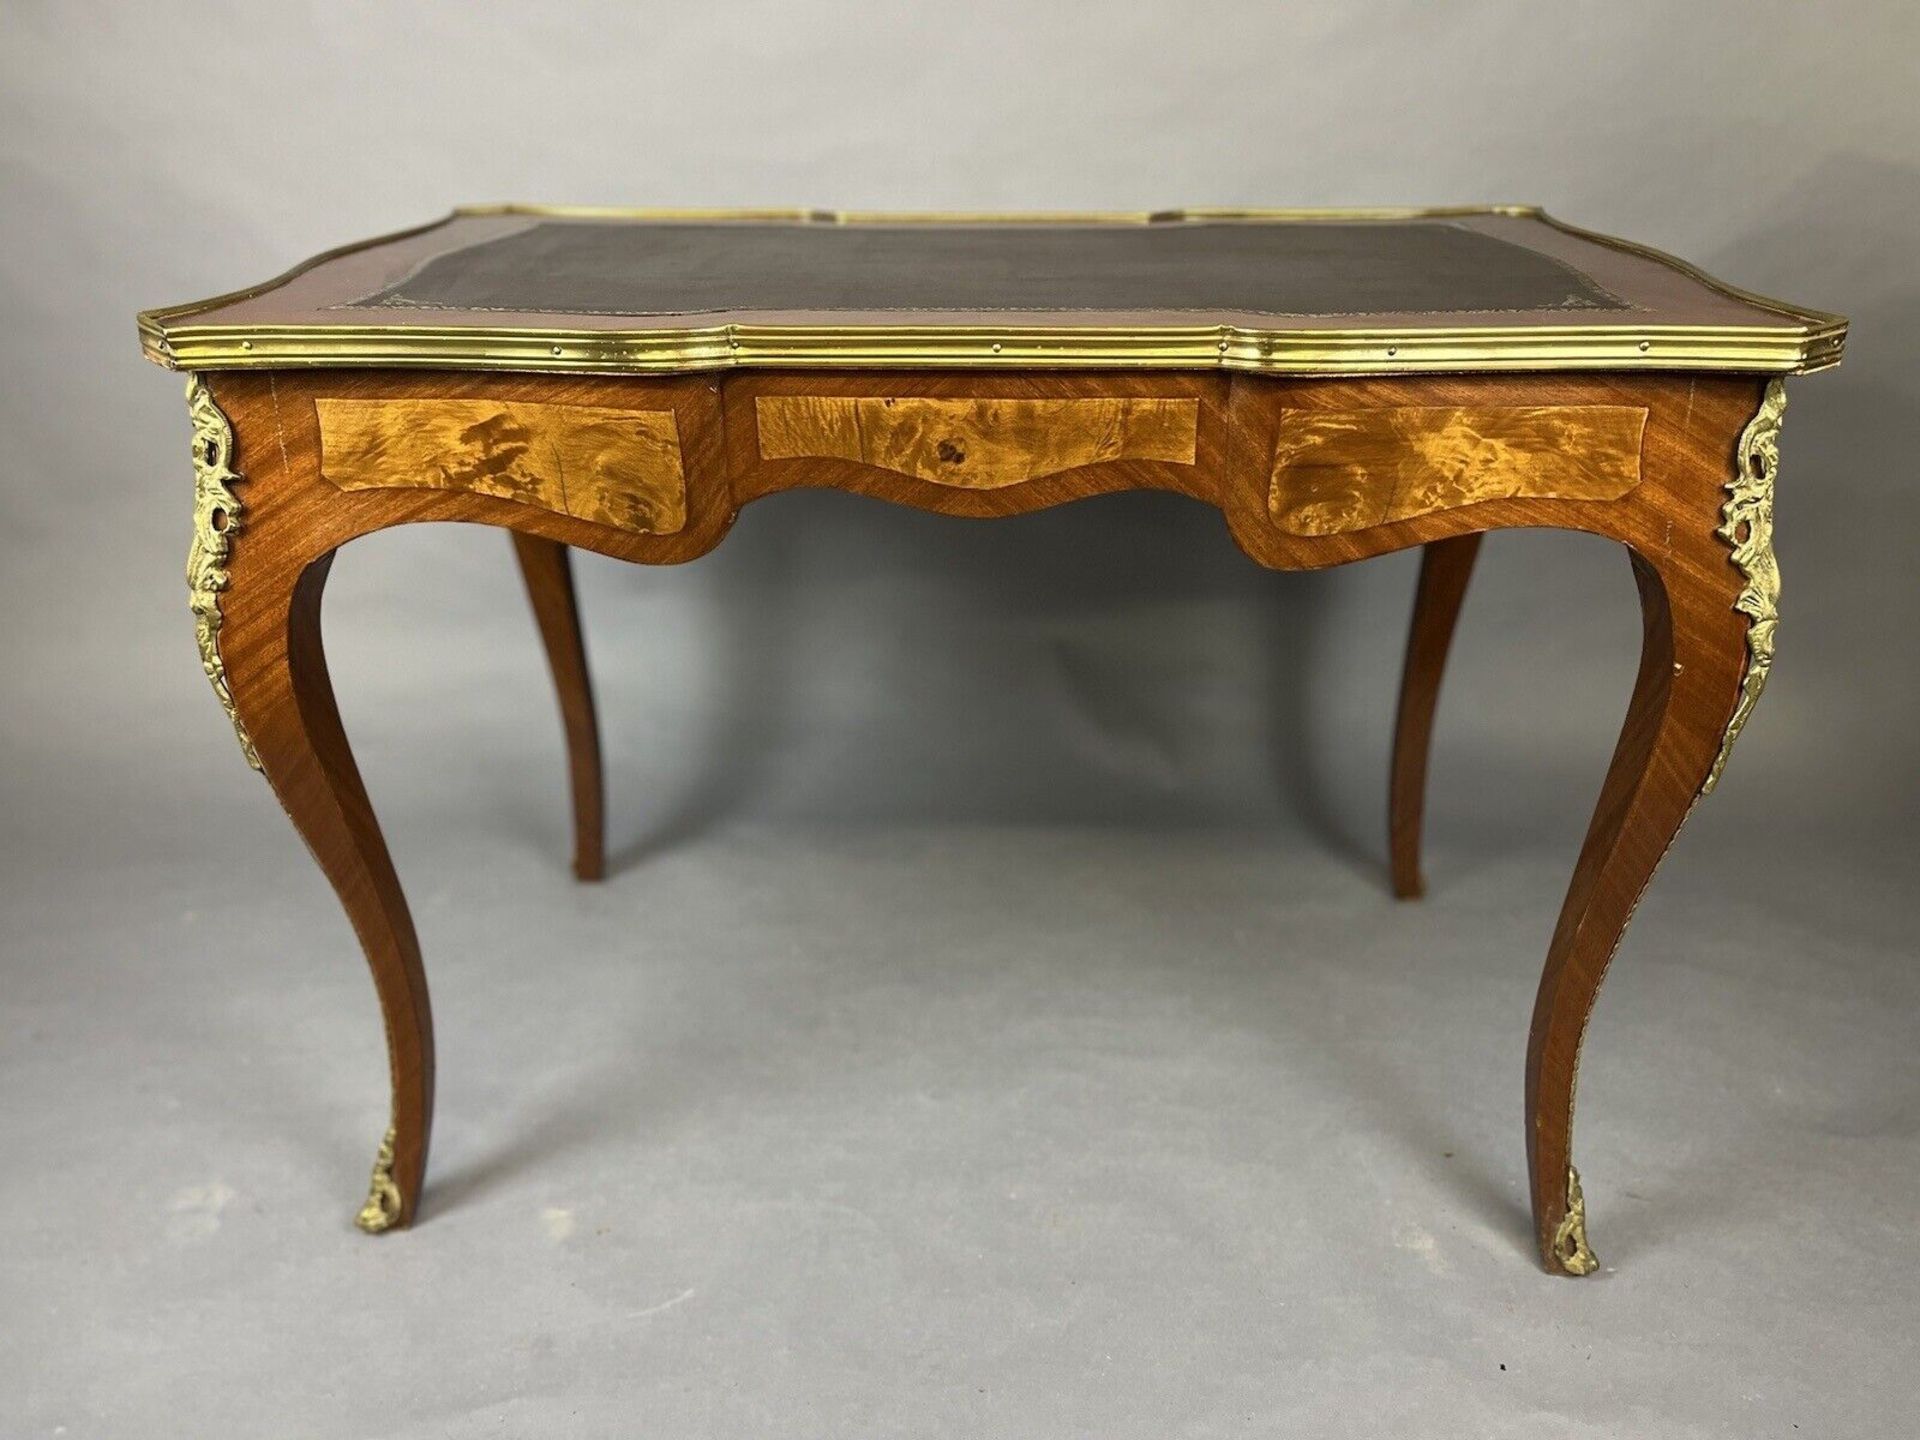 French Louis XV Style Kingwood Leather Inlay Bureau Plat Desk With Gilt Bronze Ormolu The Shaped Top